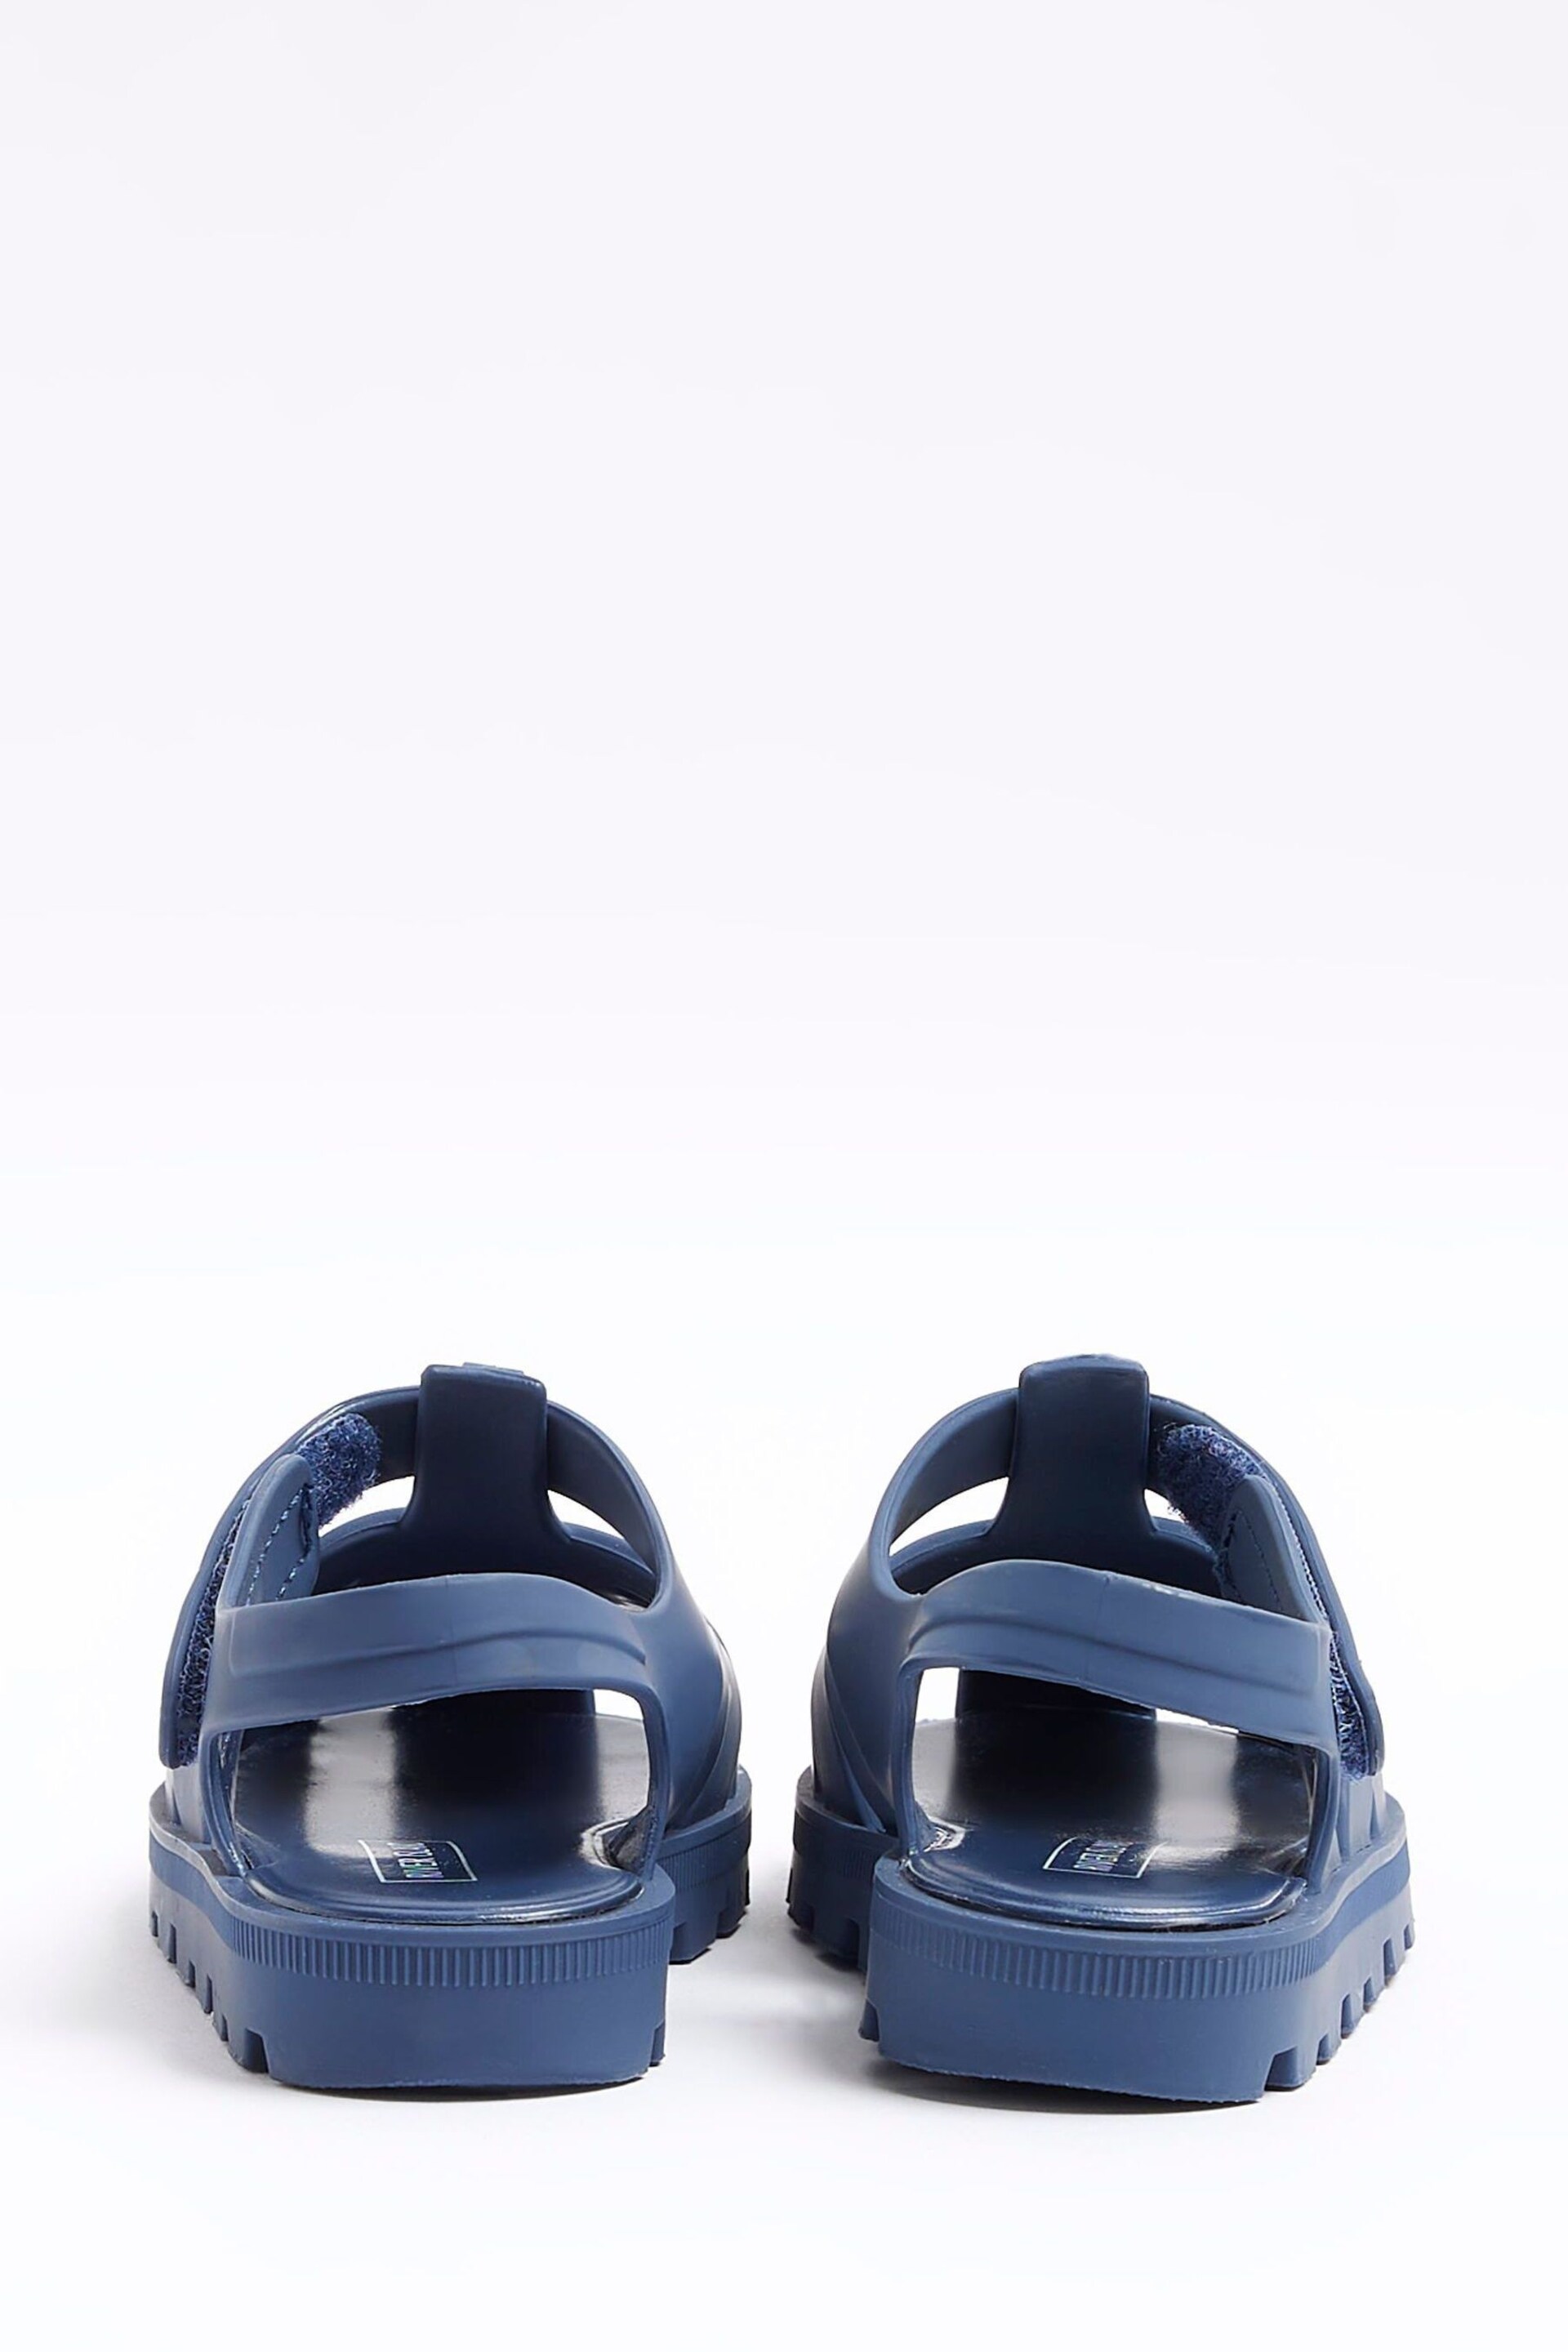 River Island Blue Boys Rubber Jelly Sandals - Image 2 of 4